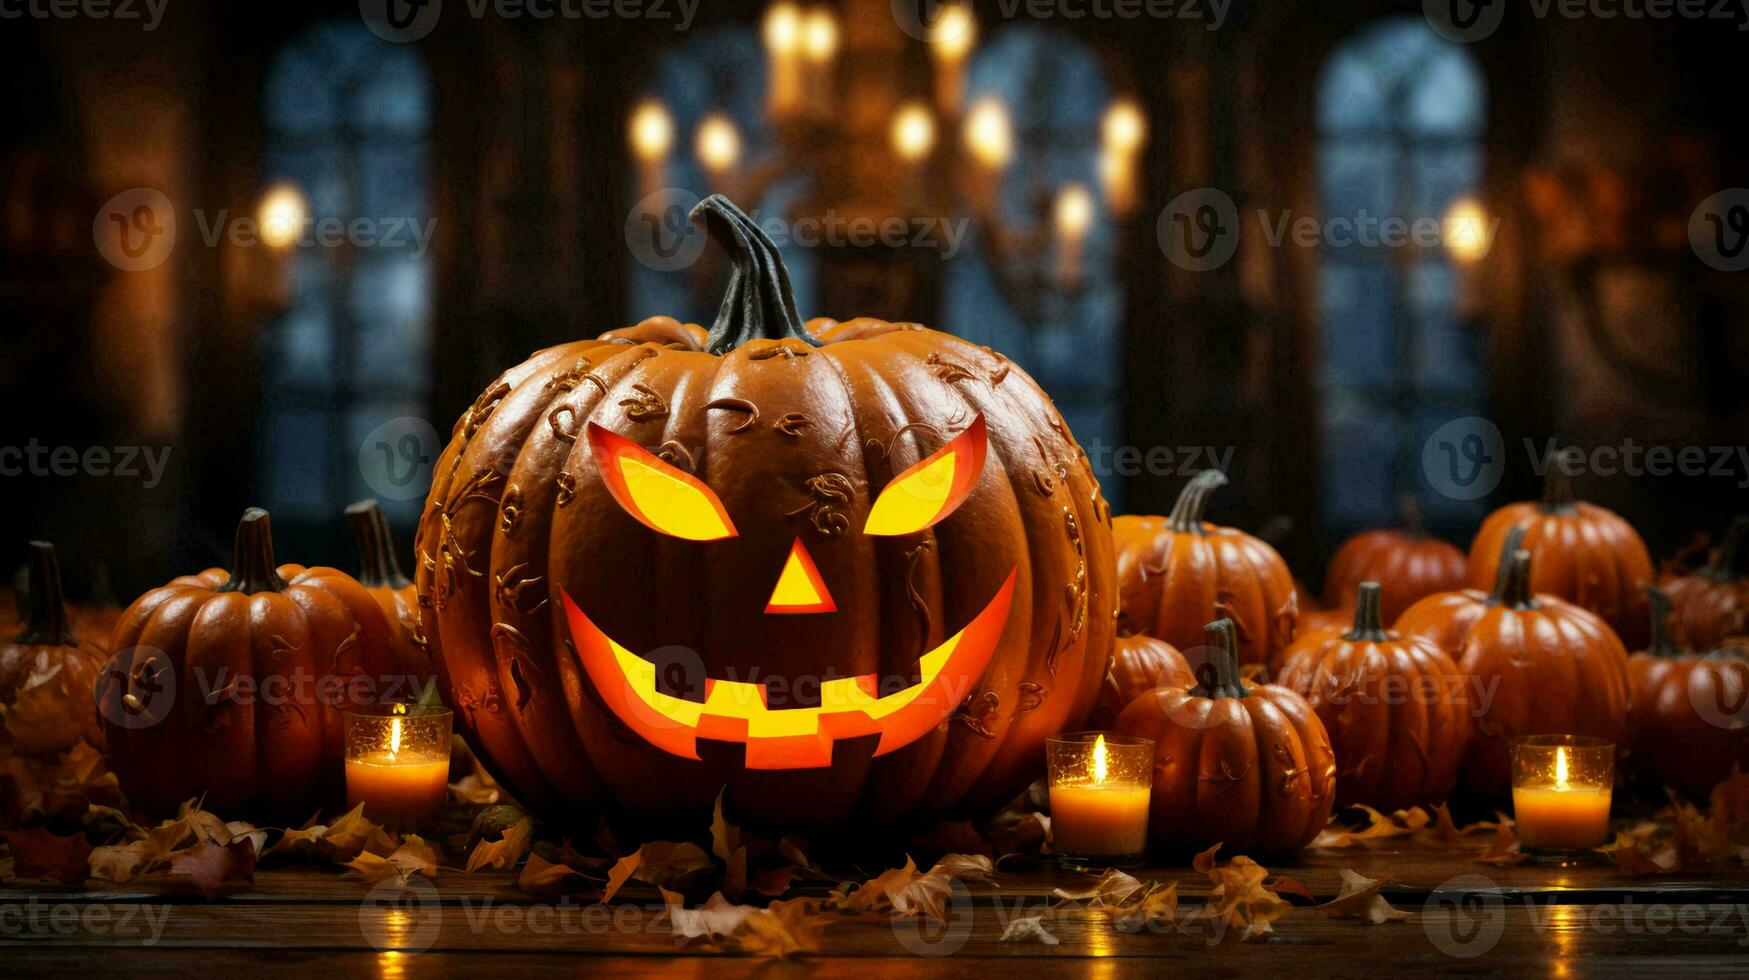 Orange large pumpkin with a carved scary face for Halloween photo